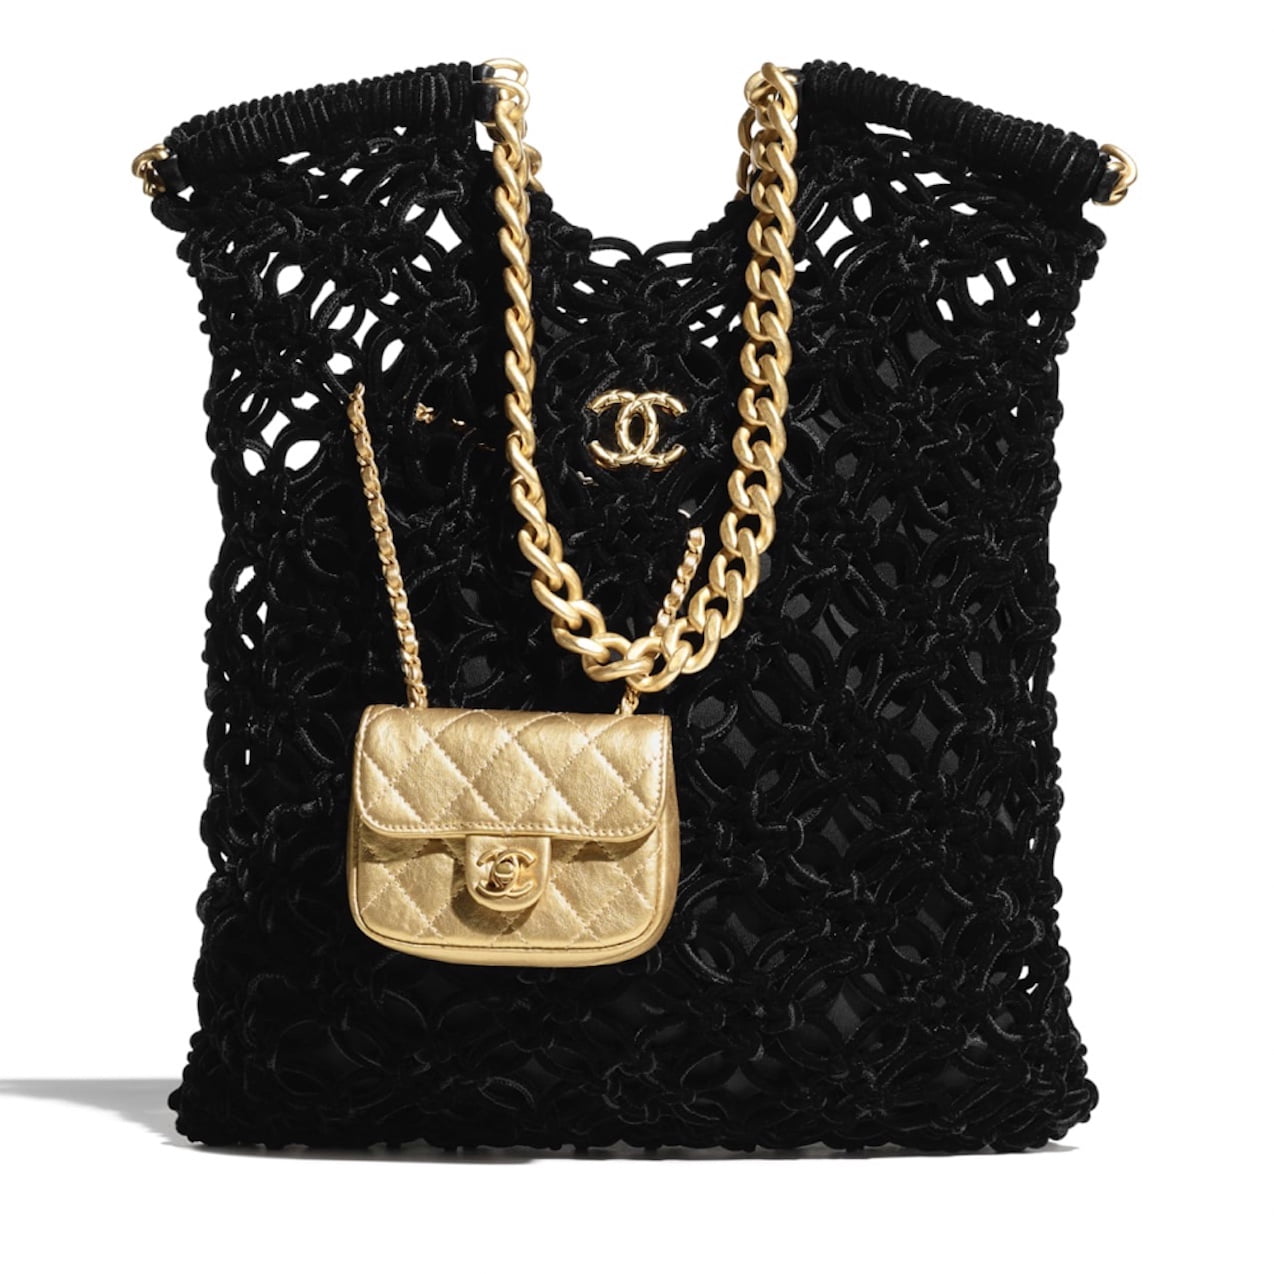 Chanel Small Drawstring Backpack Multicolored Tweed Antique Gold Hardware